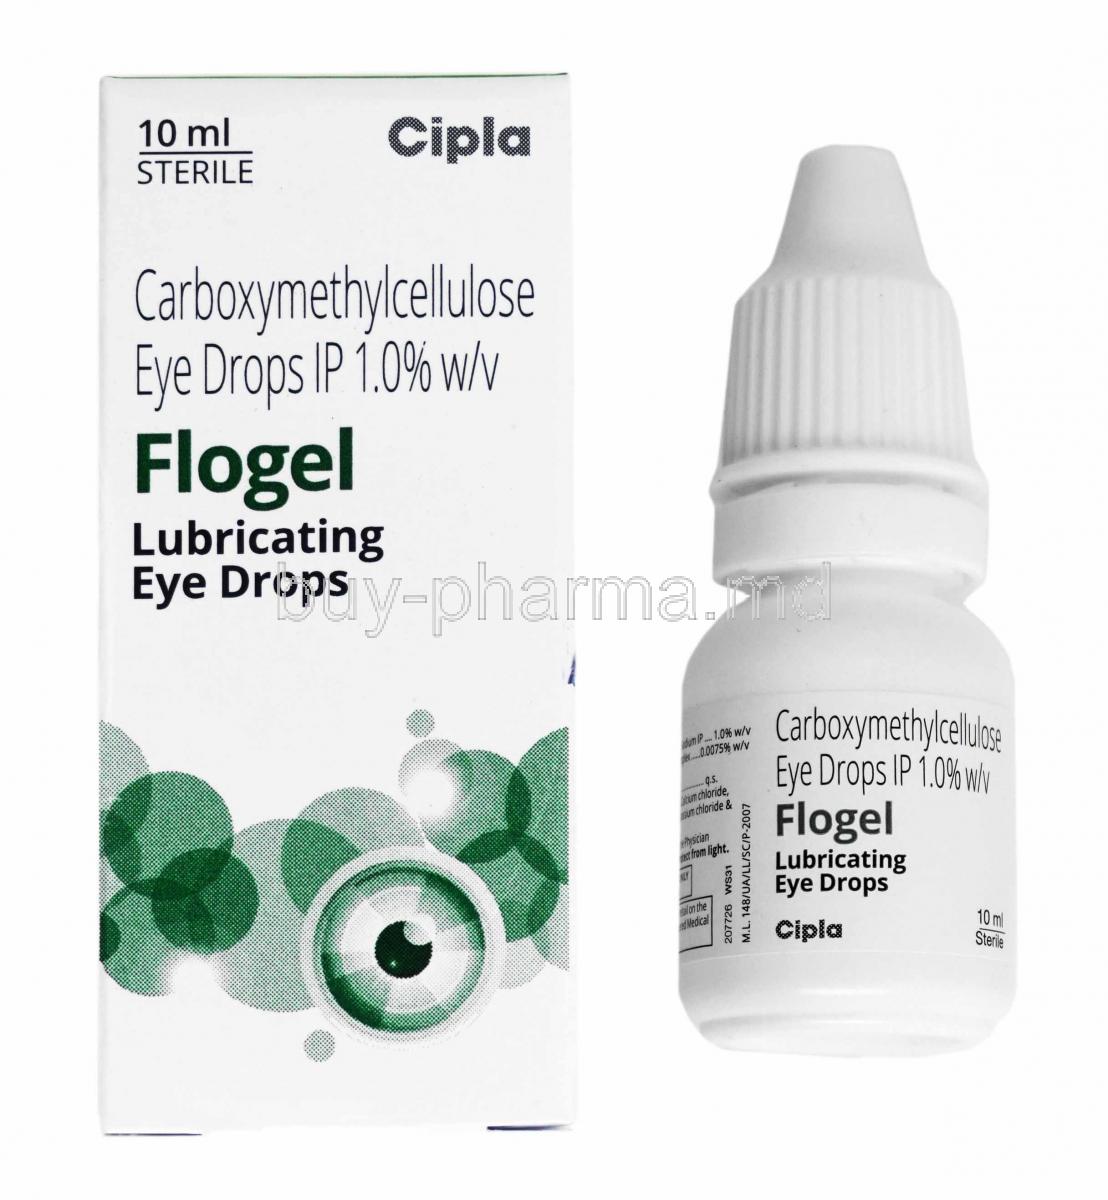 Flogel Eye Drop, Carboxymethylcellulose box and bottle